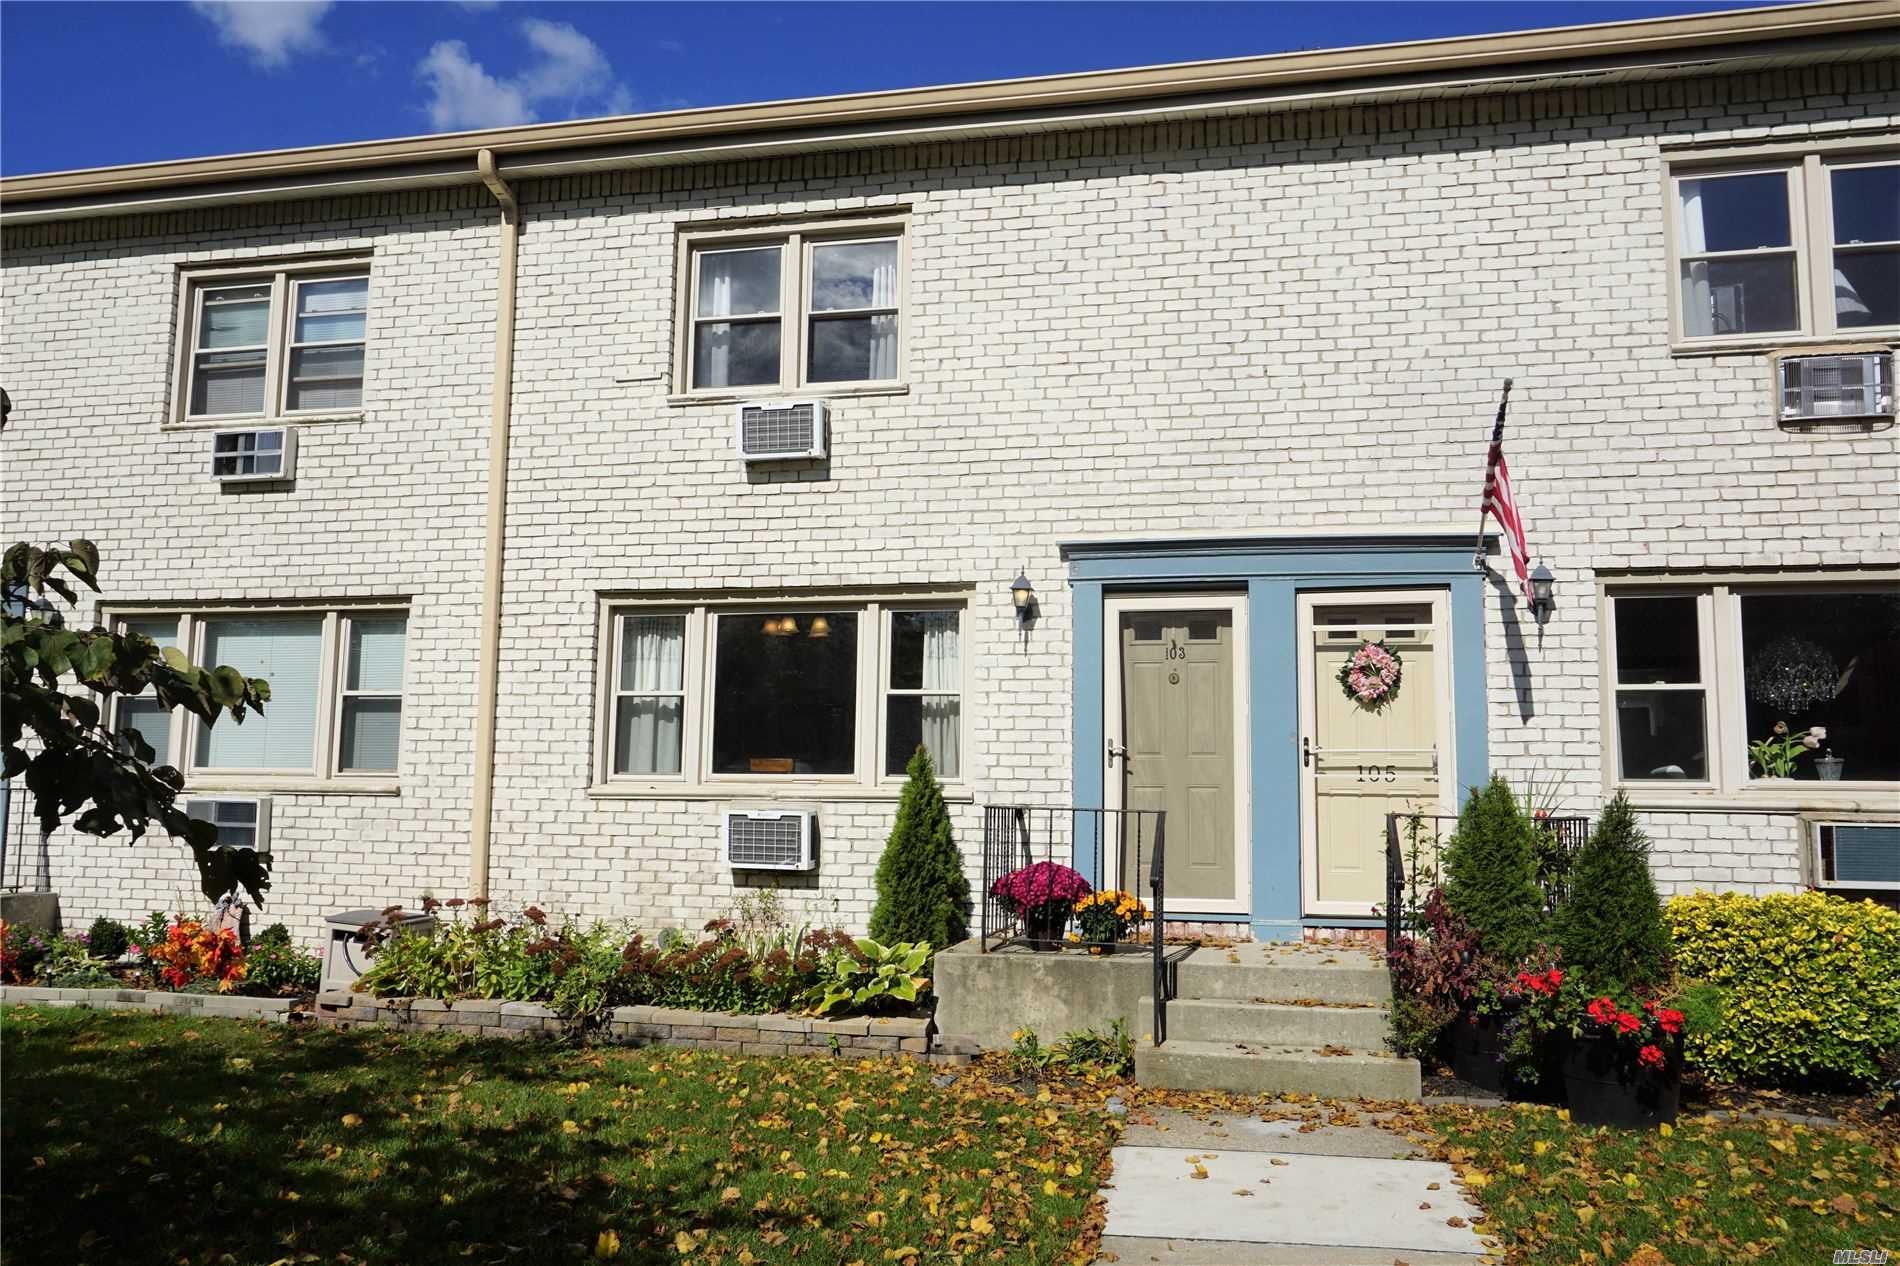 Move-in ready two-story two-bedroom co-op in the heart of Islip. Complex is next to Islip LIRR station. Close to shopping, parks, and Main Street. Mint condition. Updated kitchen. Wood floors throughout. Laundry in unit.